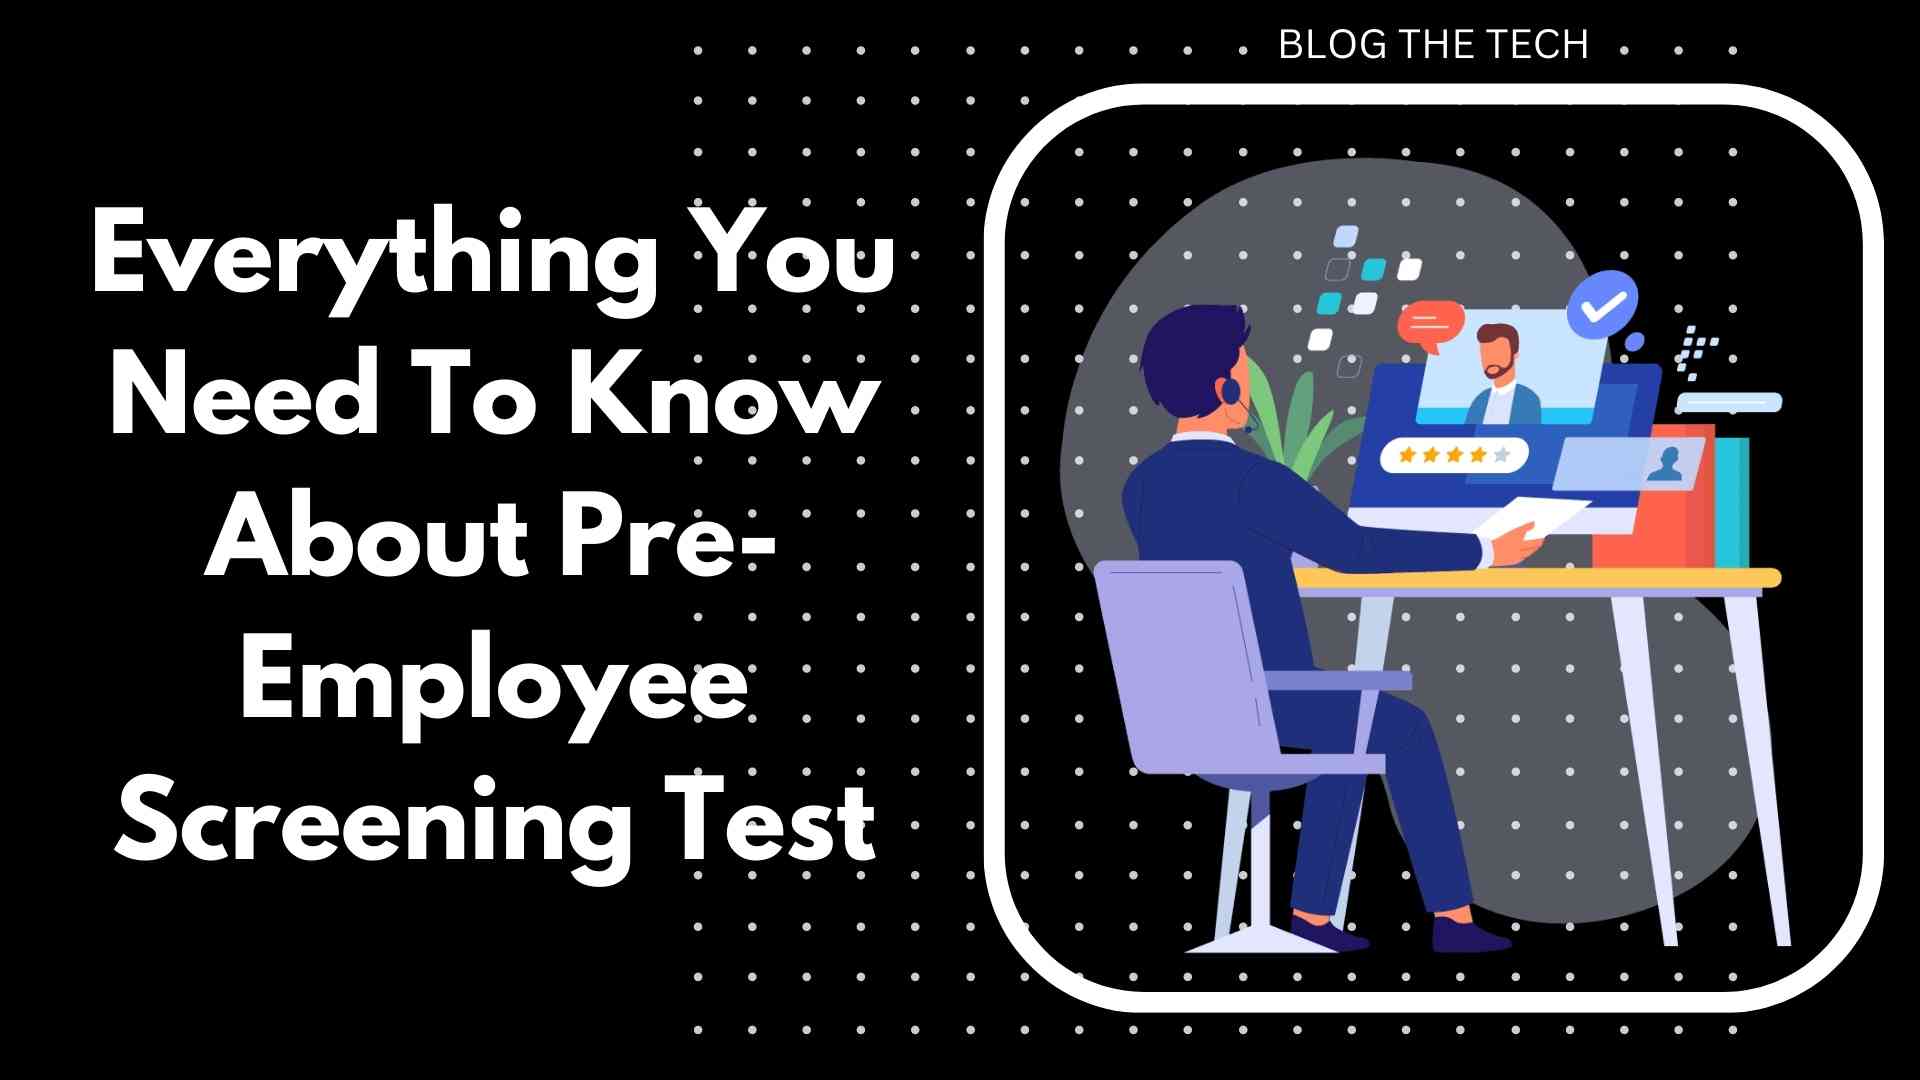 Everything You Need To Know About Pre-Employee Screening Test